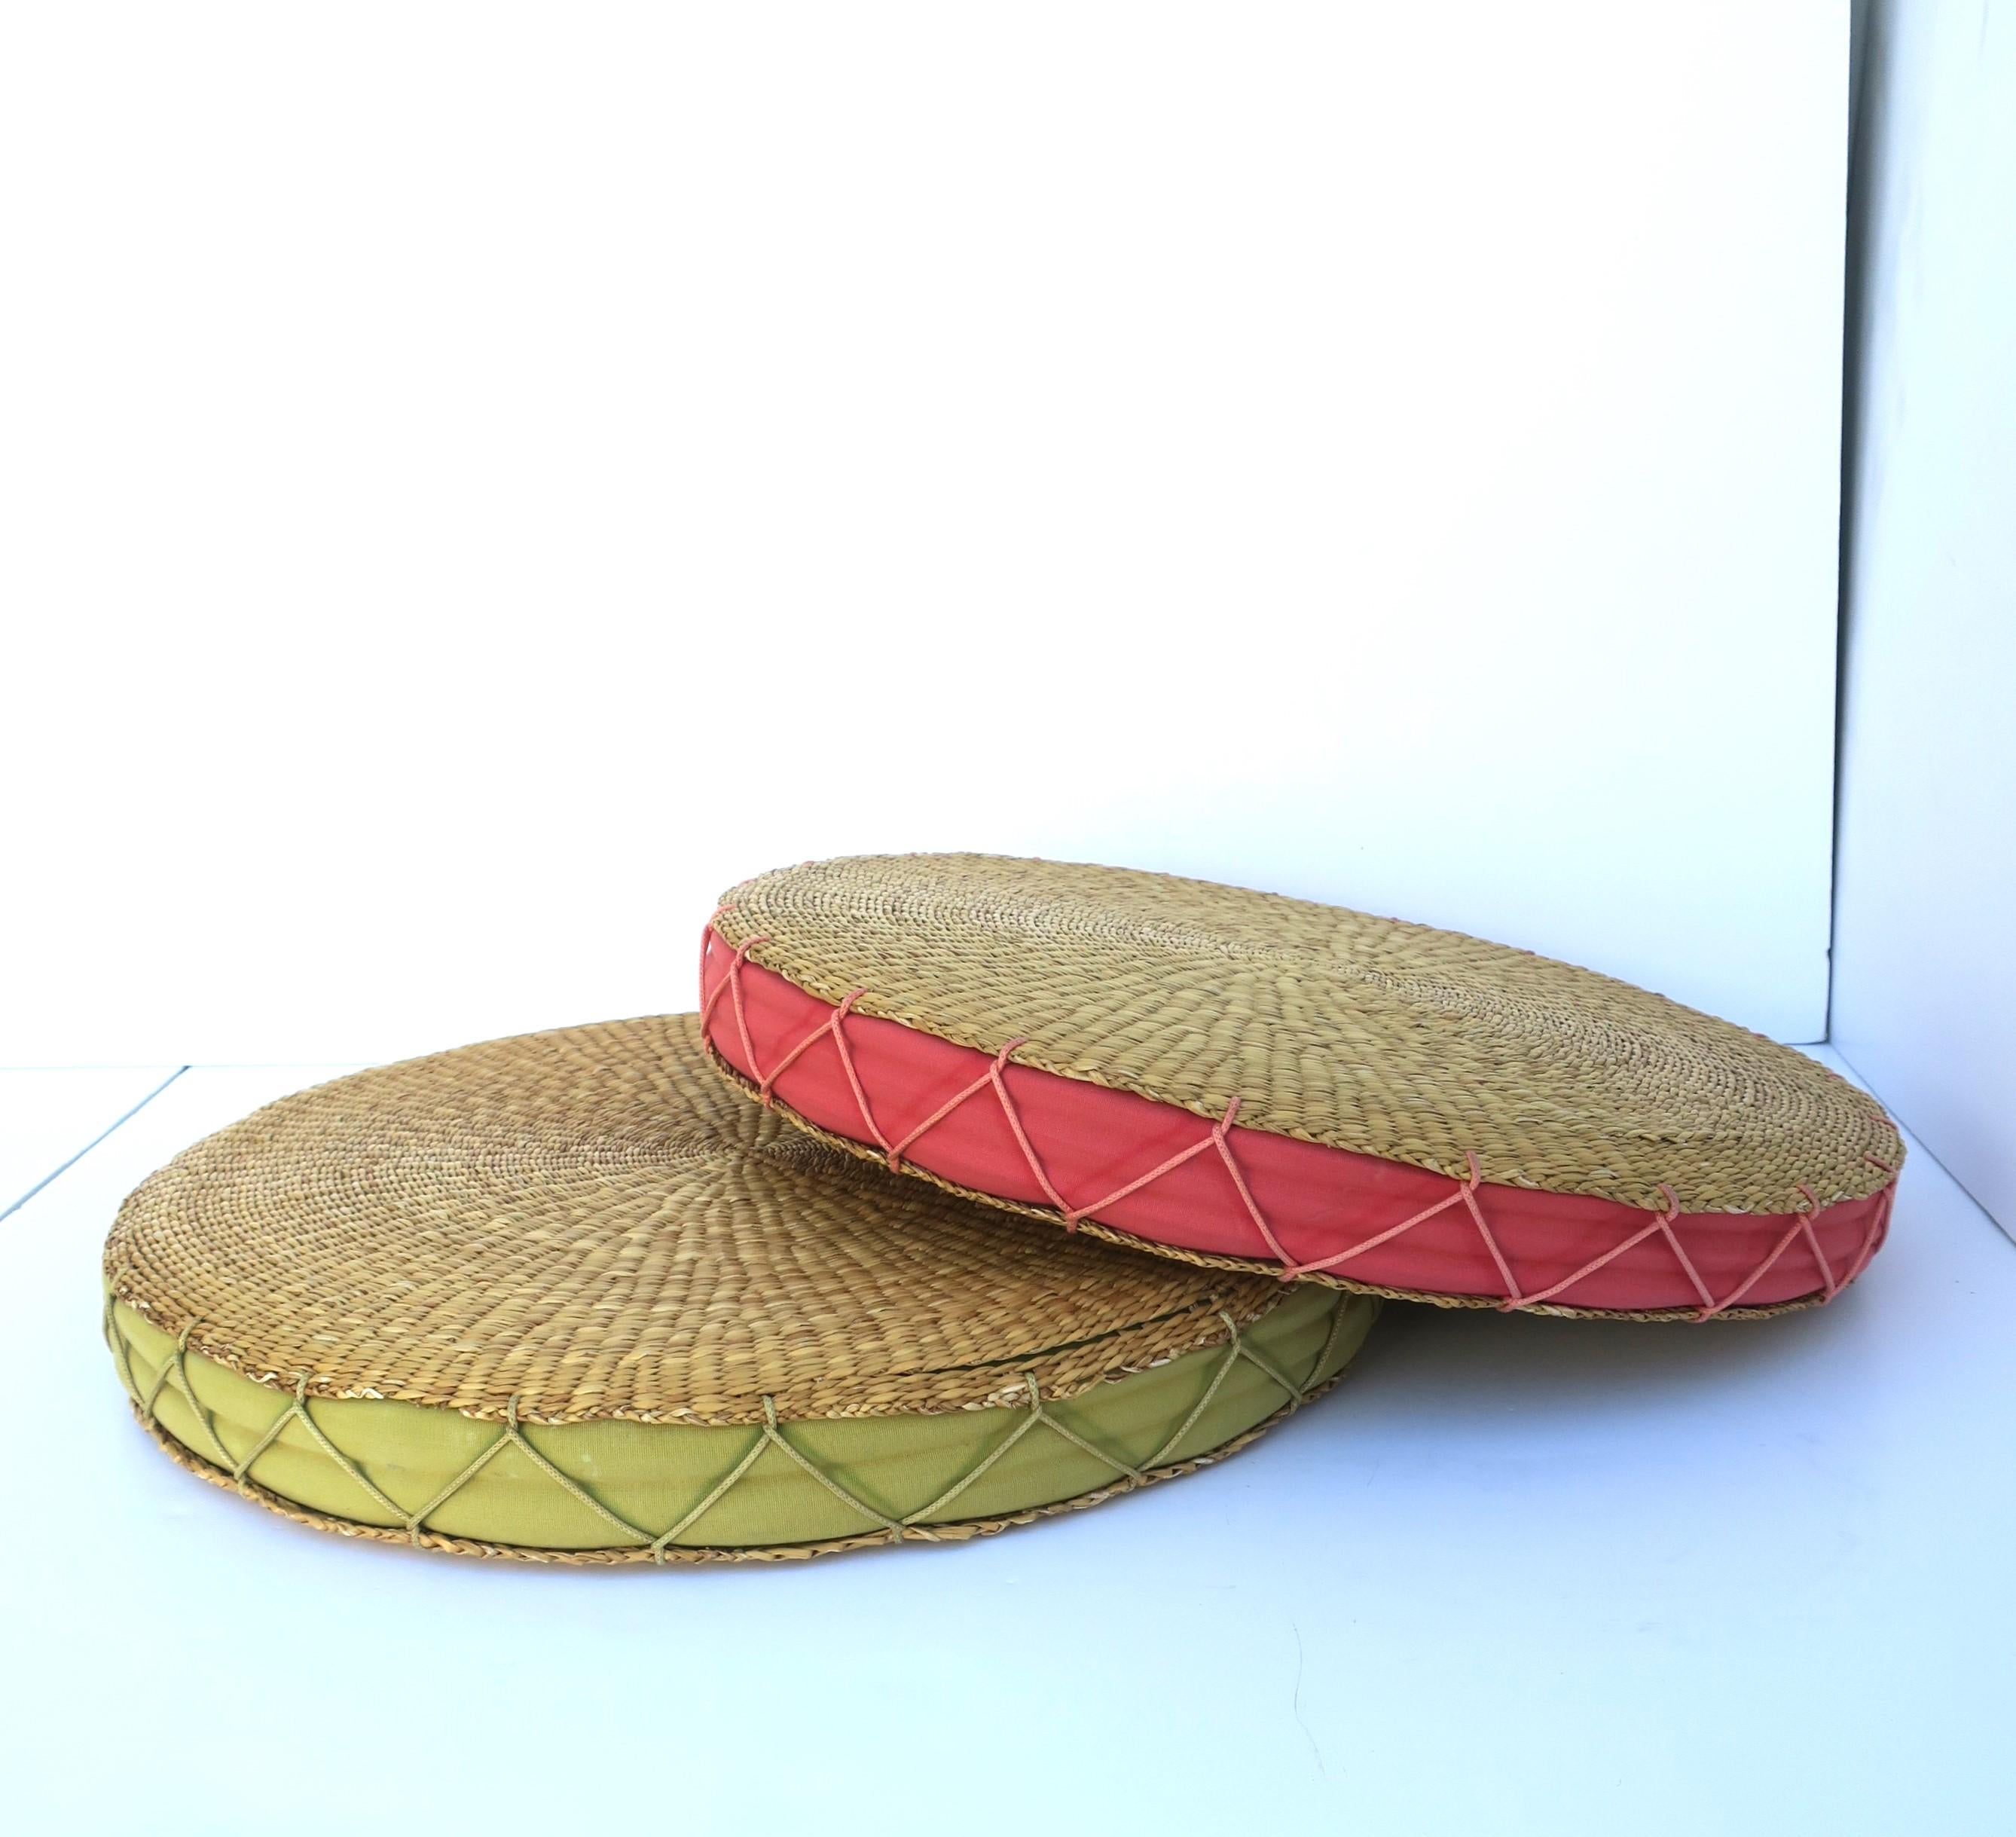 Cotton Wicker Seat or Floor Cushion, Green and Tan For Sale